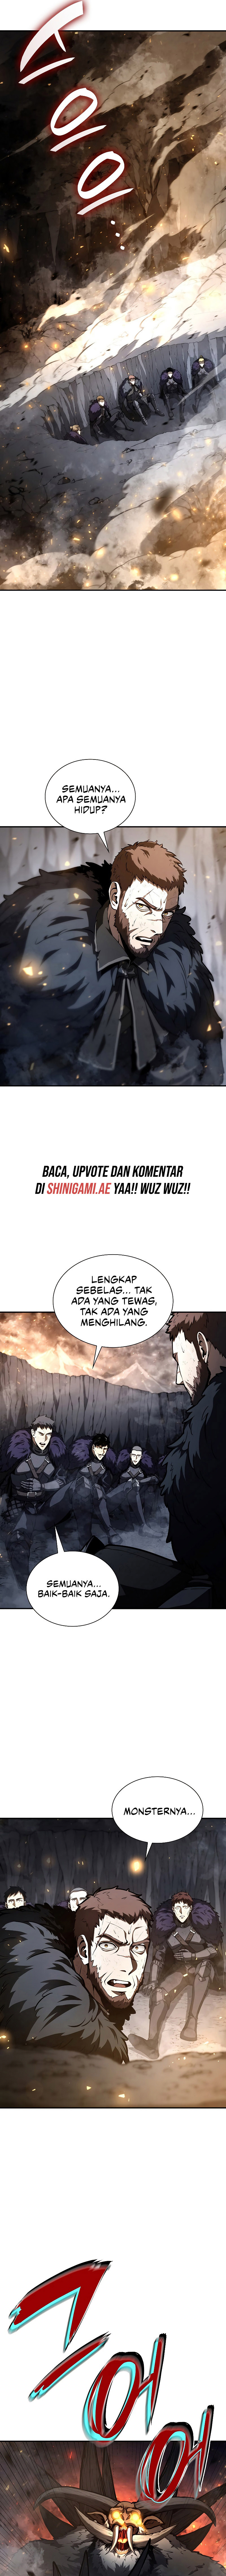 id-i-returned-as-an-fff-class-witch-doctor Chapter 44